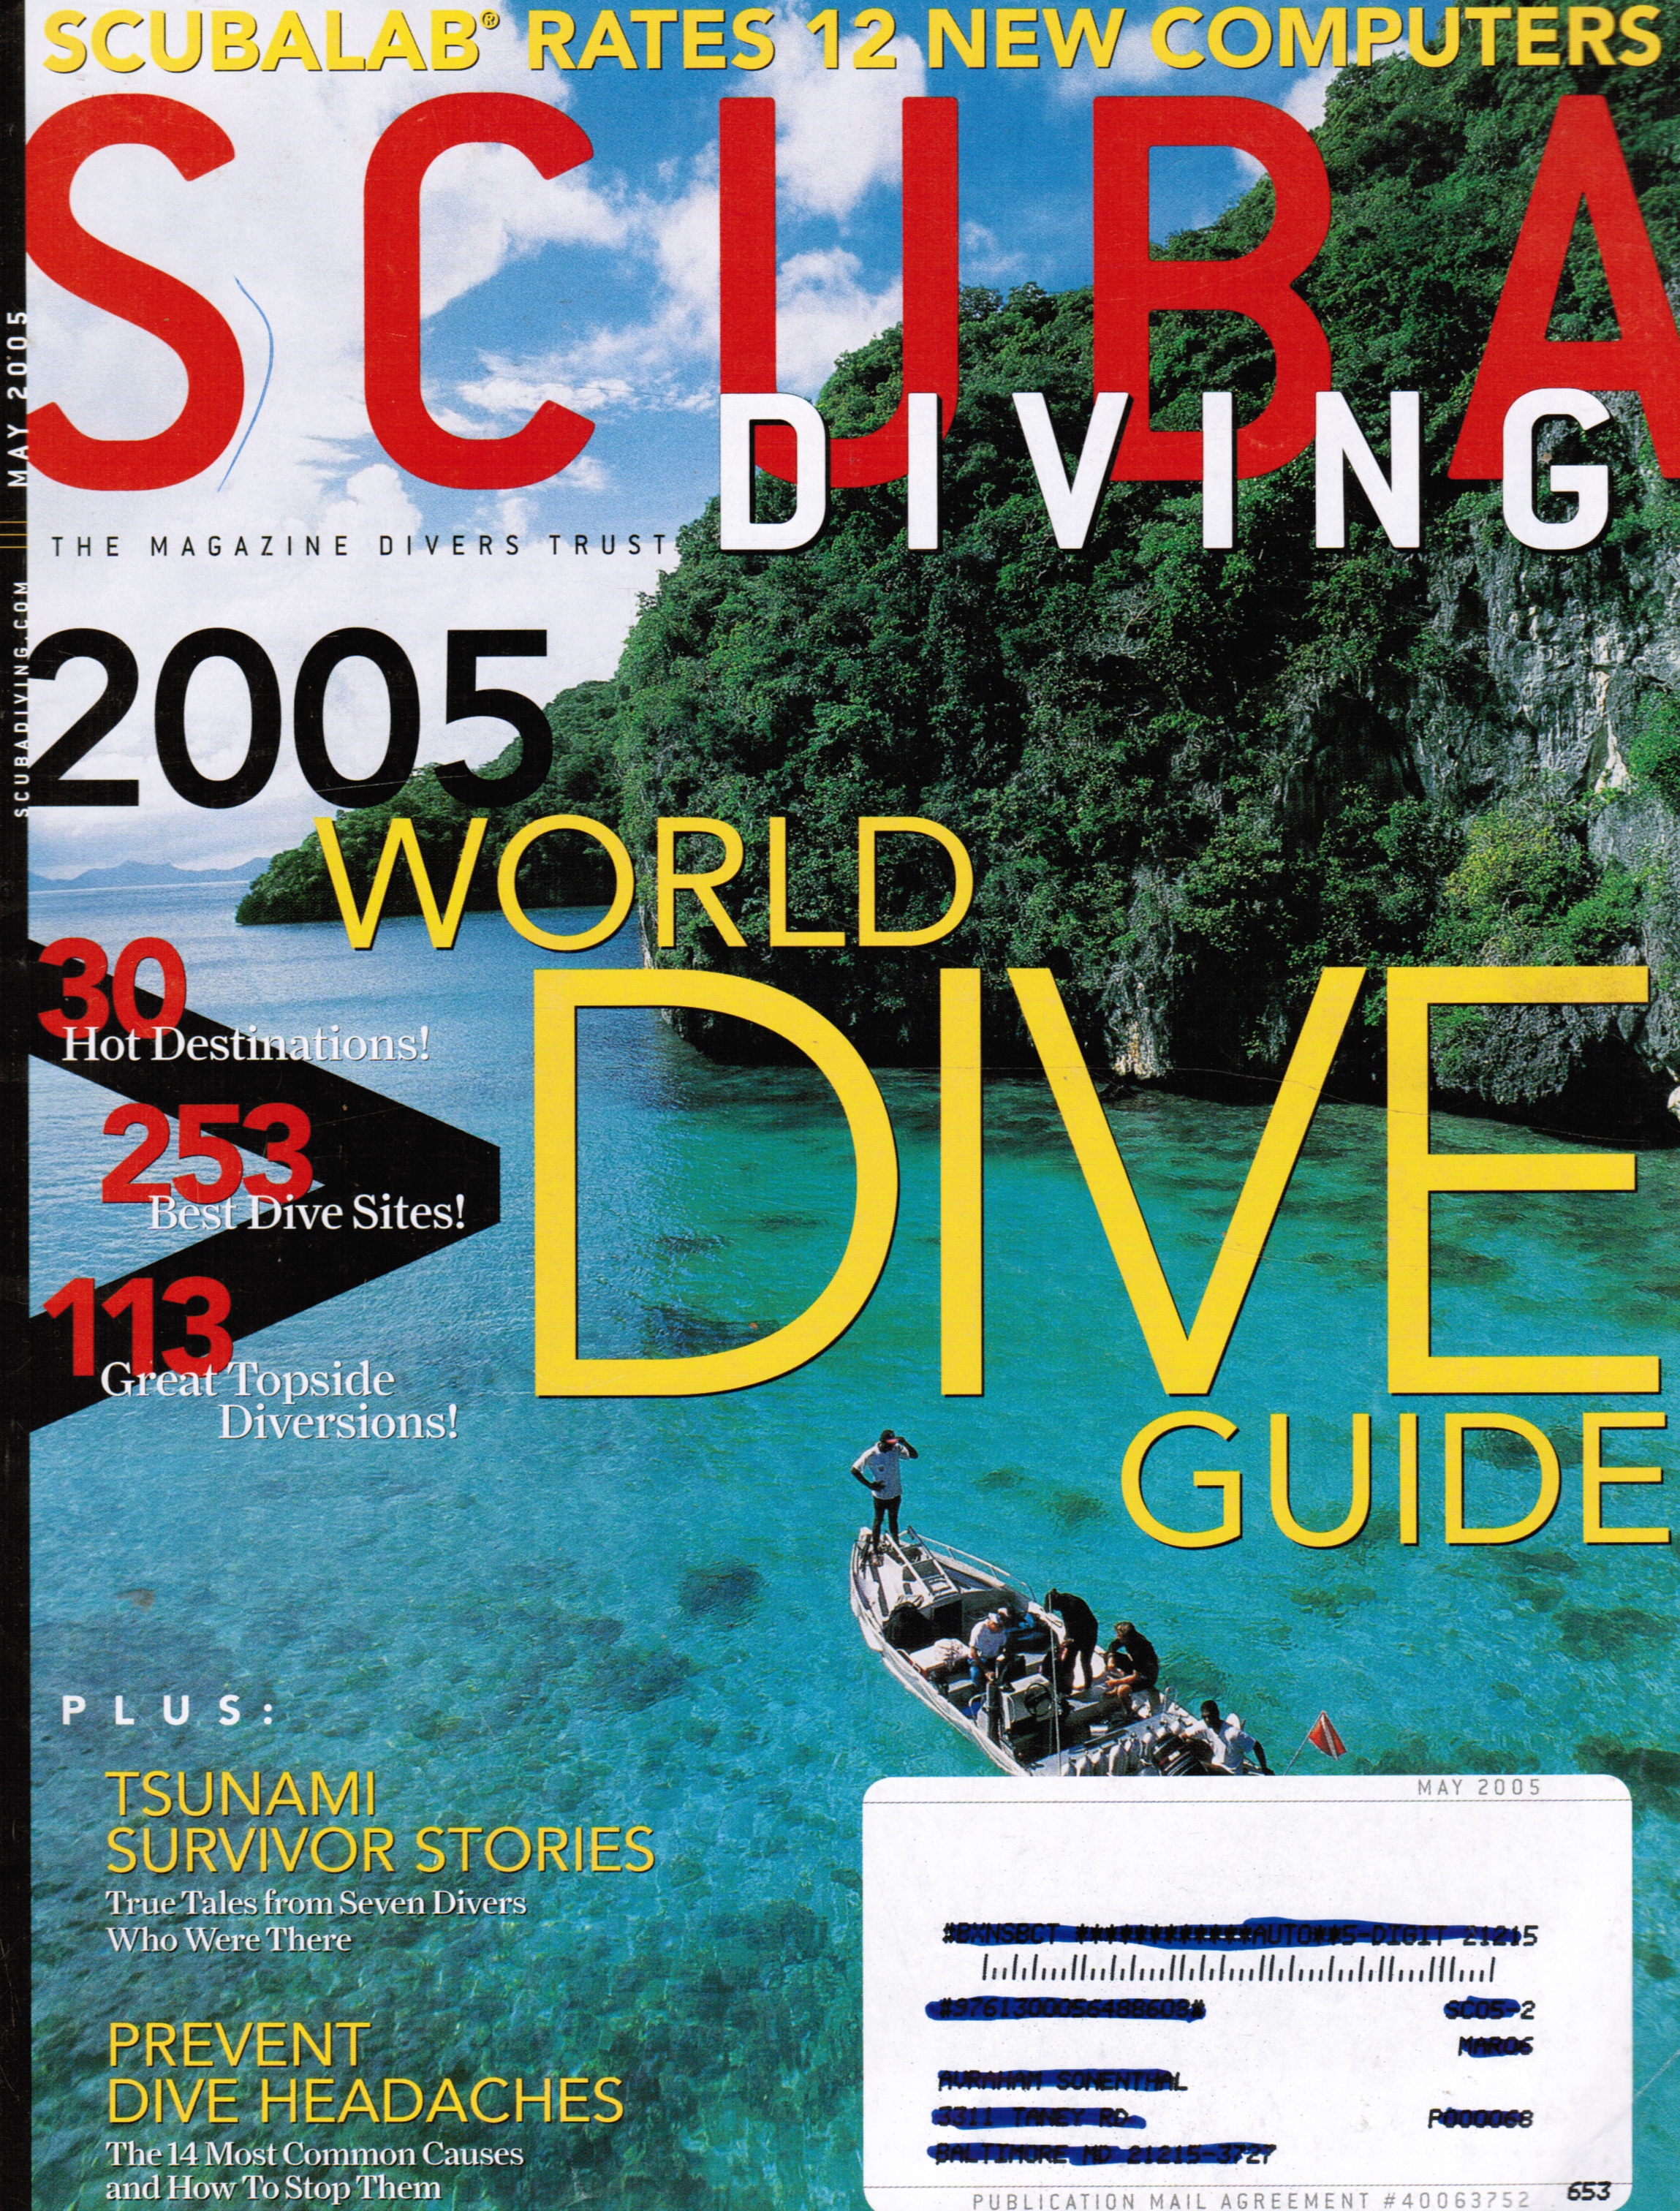 Image for Scuba Diving Magazine: May 2005 Feature: 2005 World Dive Guide